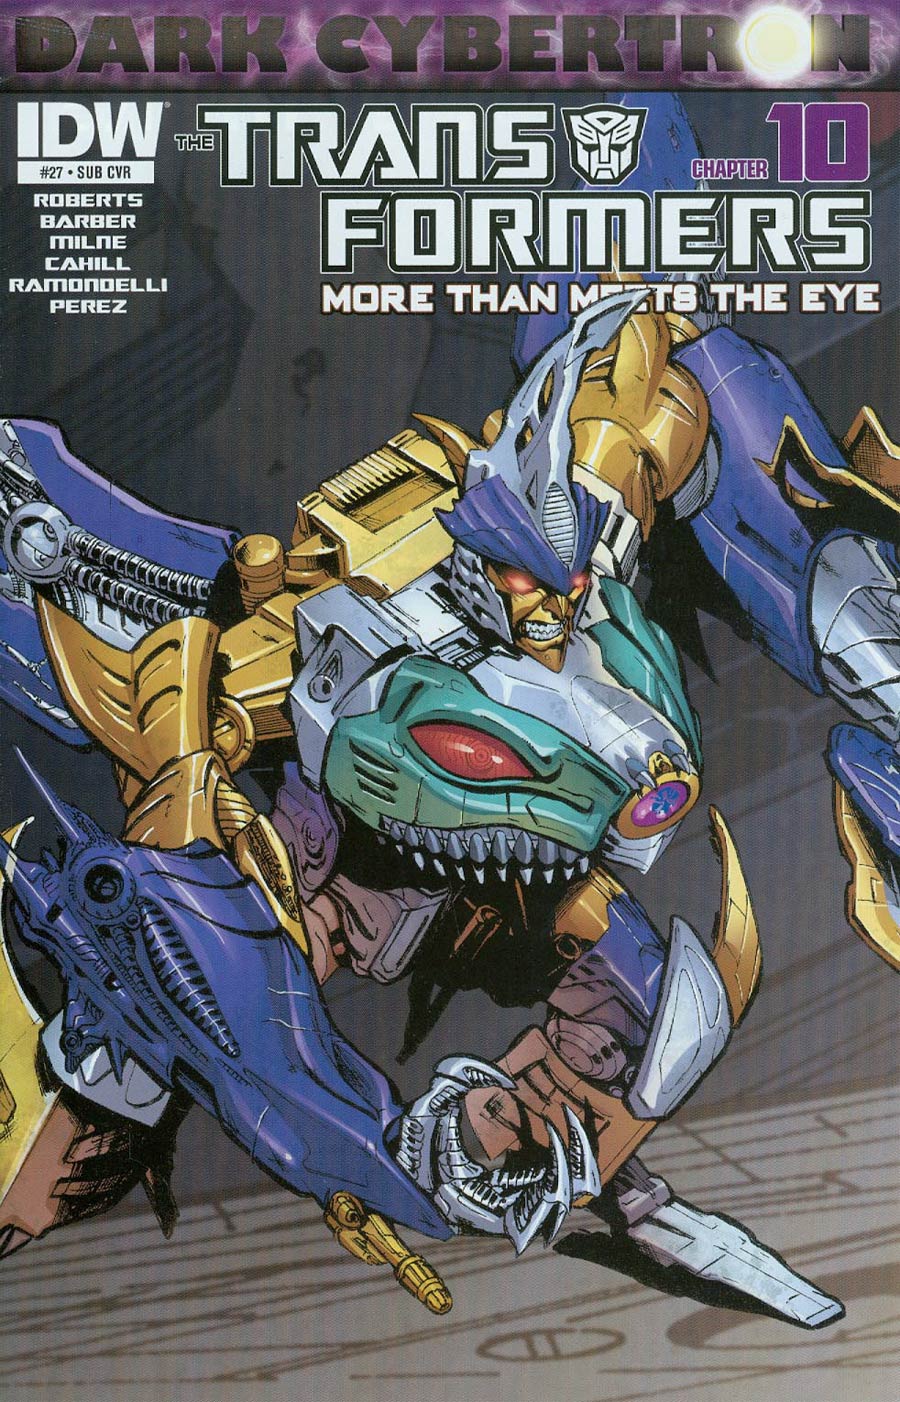 Transformers More Than Meets The Eye #27 Cover B Variant Phil Jimenez Subscription Cover (Dark Cybertron Part 10)